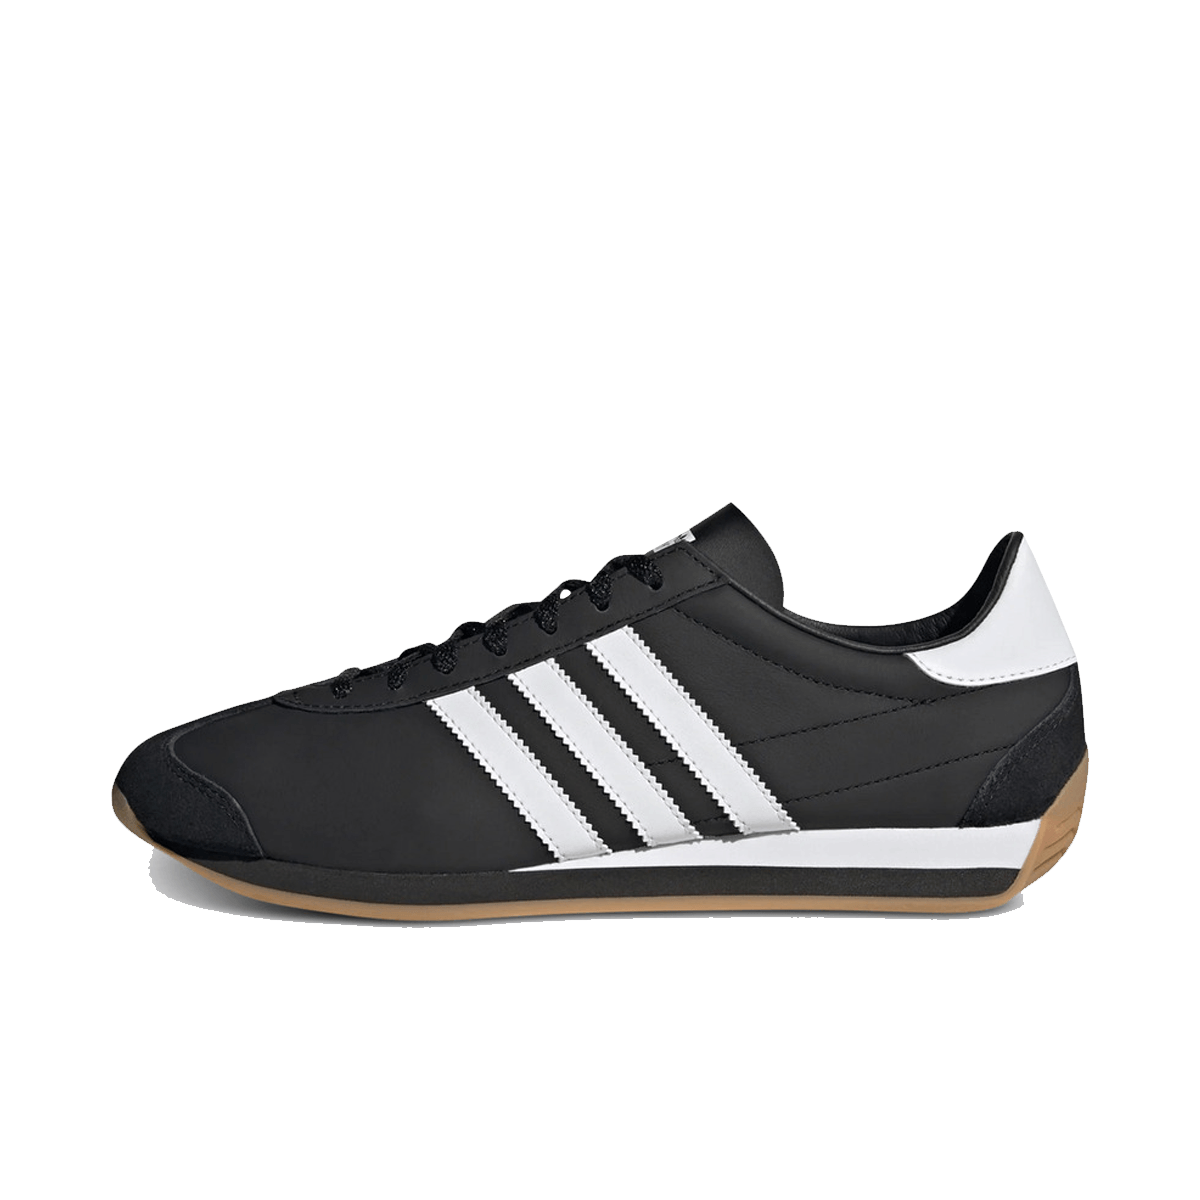 adidas Country OG 'Core Black' IE4231